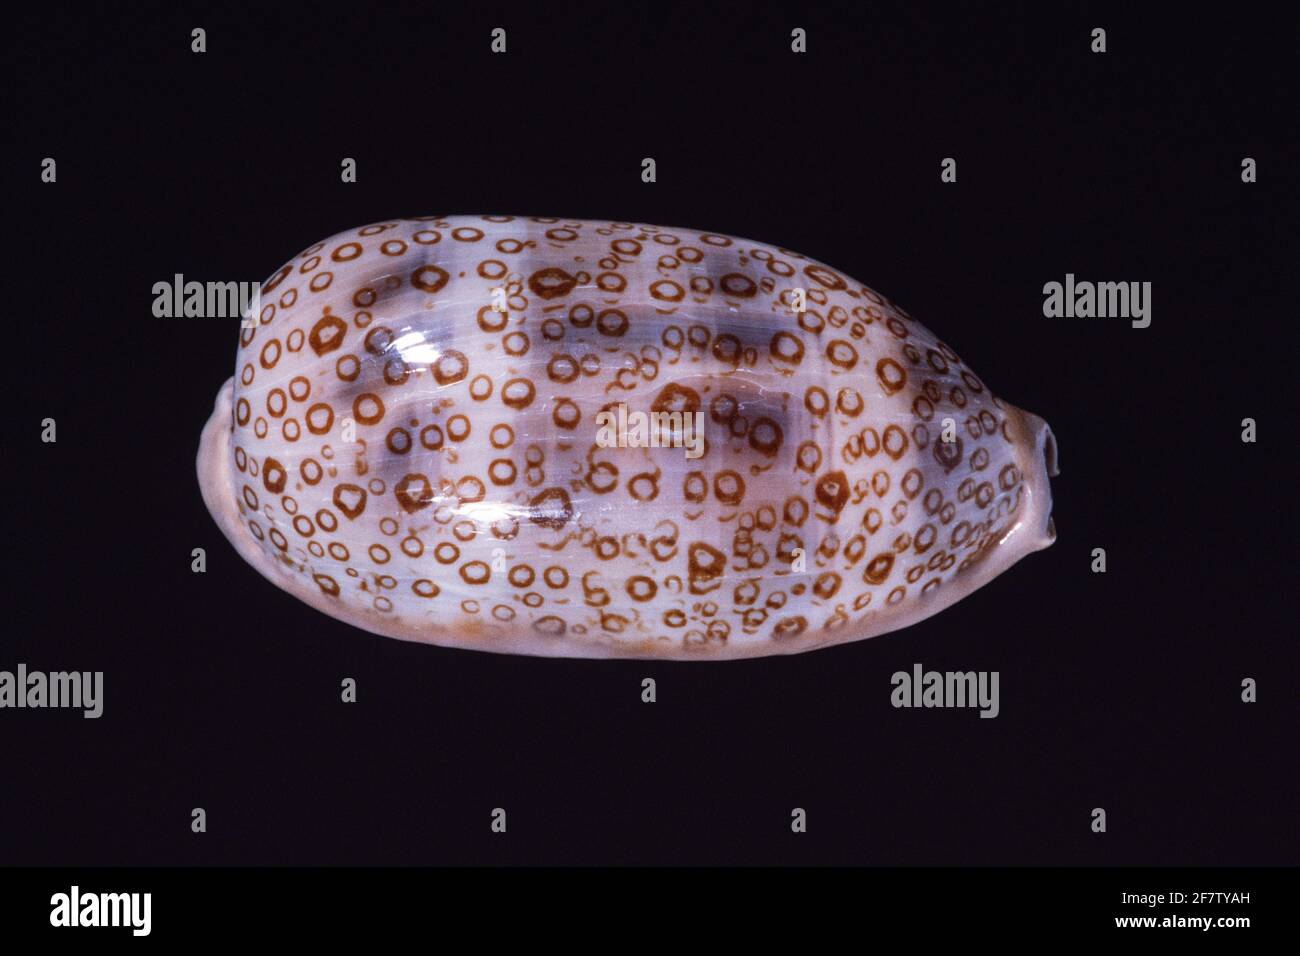 Eyed Cowry, Arestorides argus, a sea snail found in the Indo-Pacific region.  It is a large cowry shell. Stock Photo